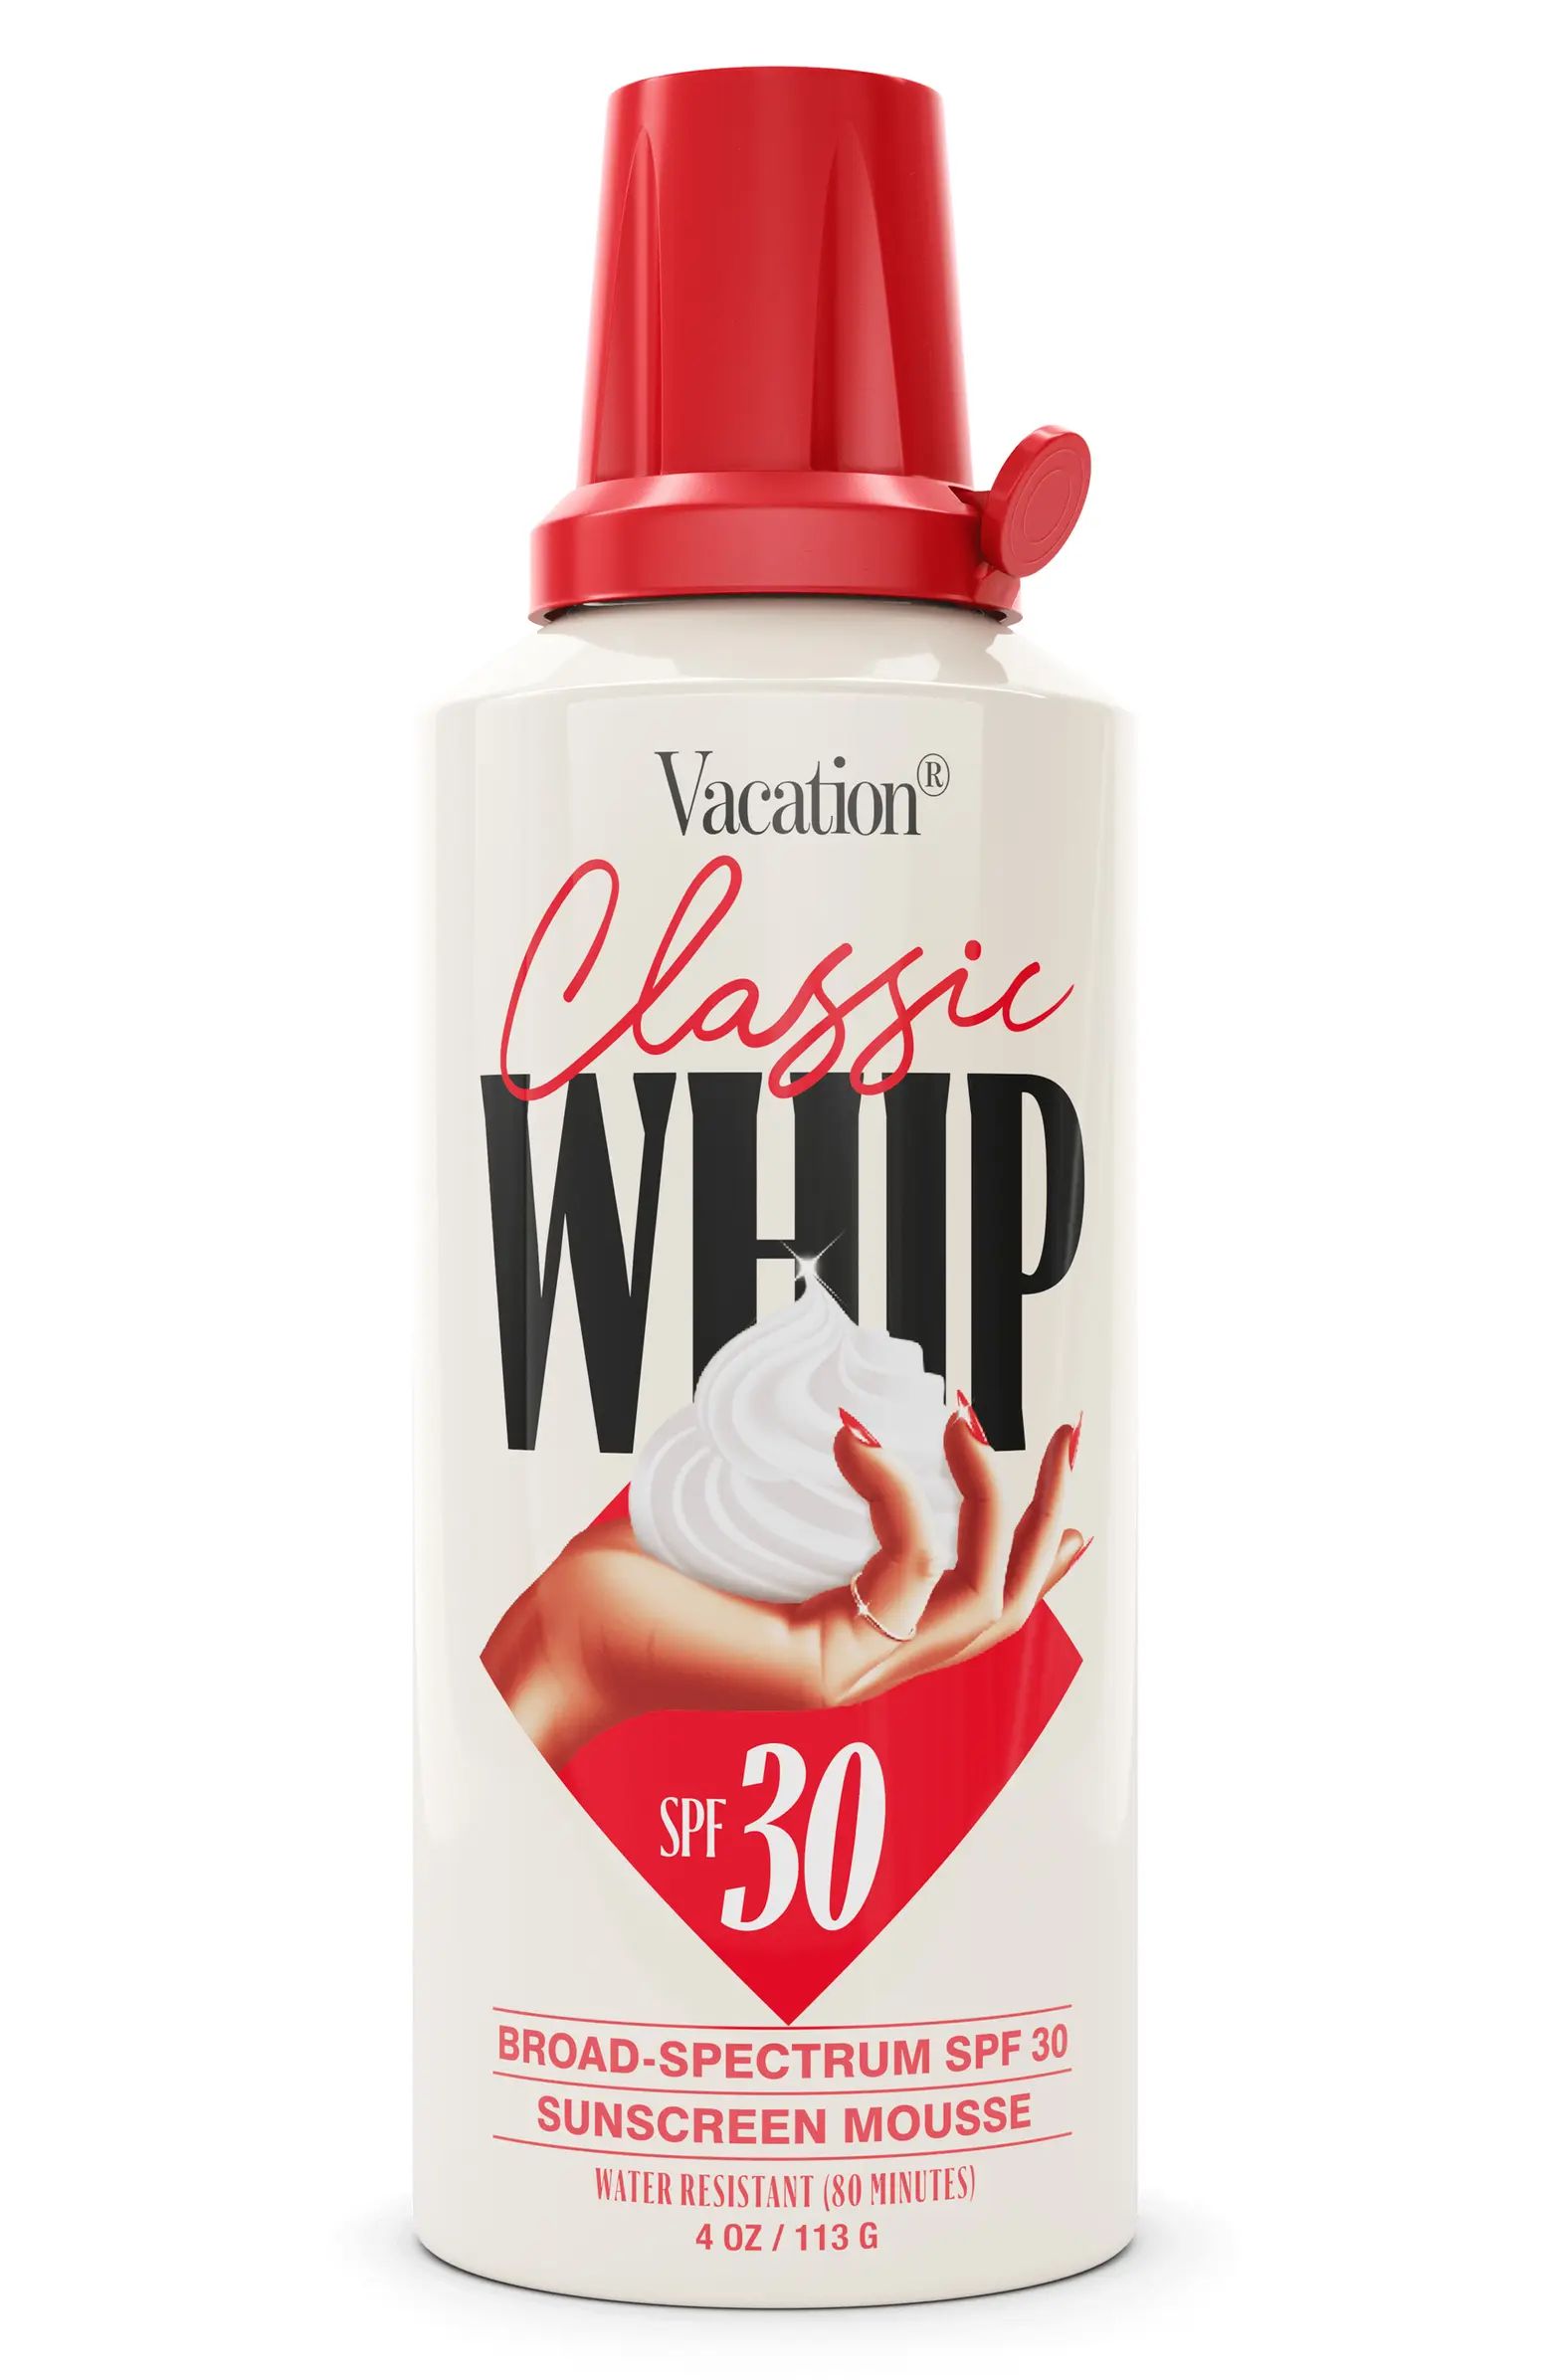 Classic Whip SPF 30 Sunscreen Mousse | Nordstrom